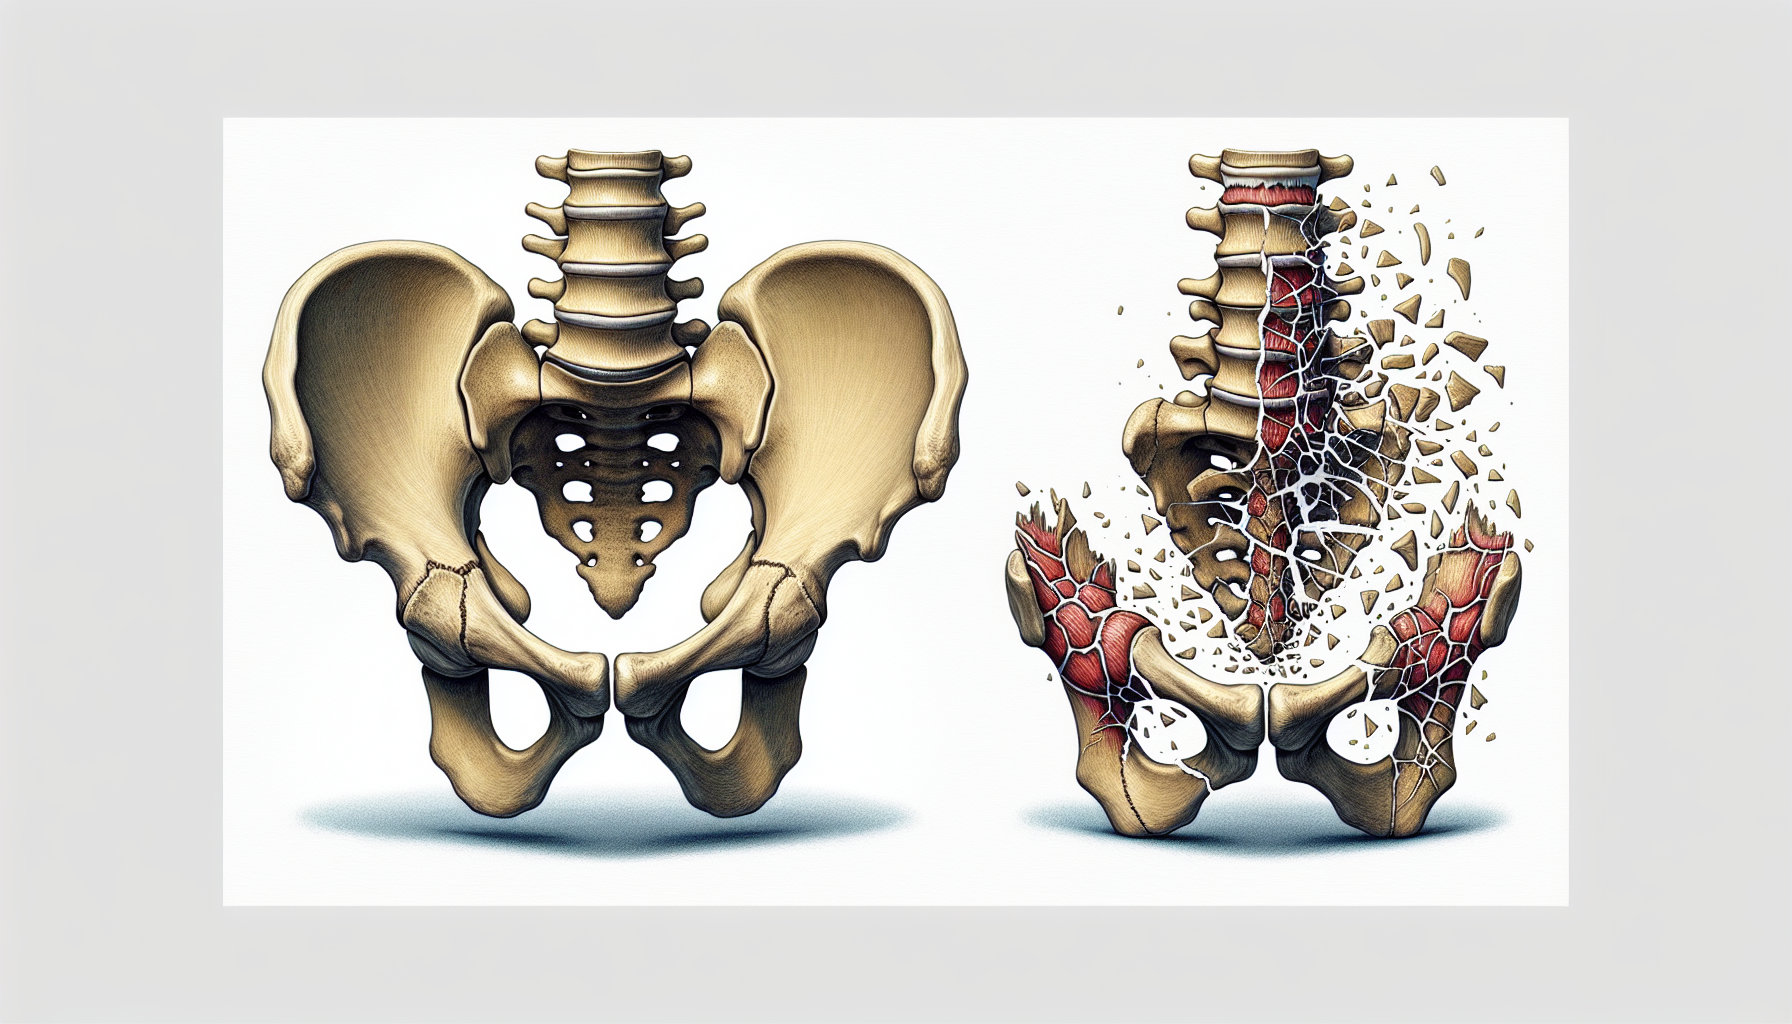 Pelvic Fracture from a Car Accident